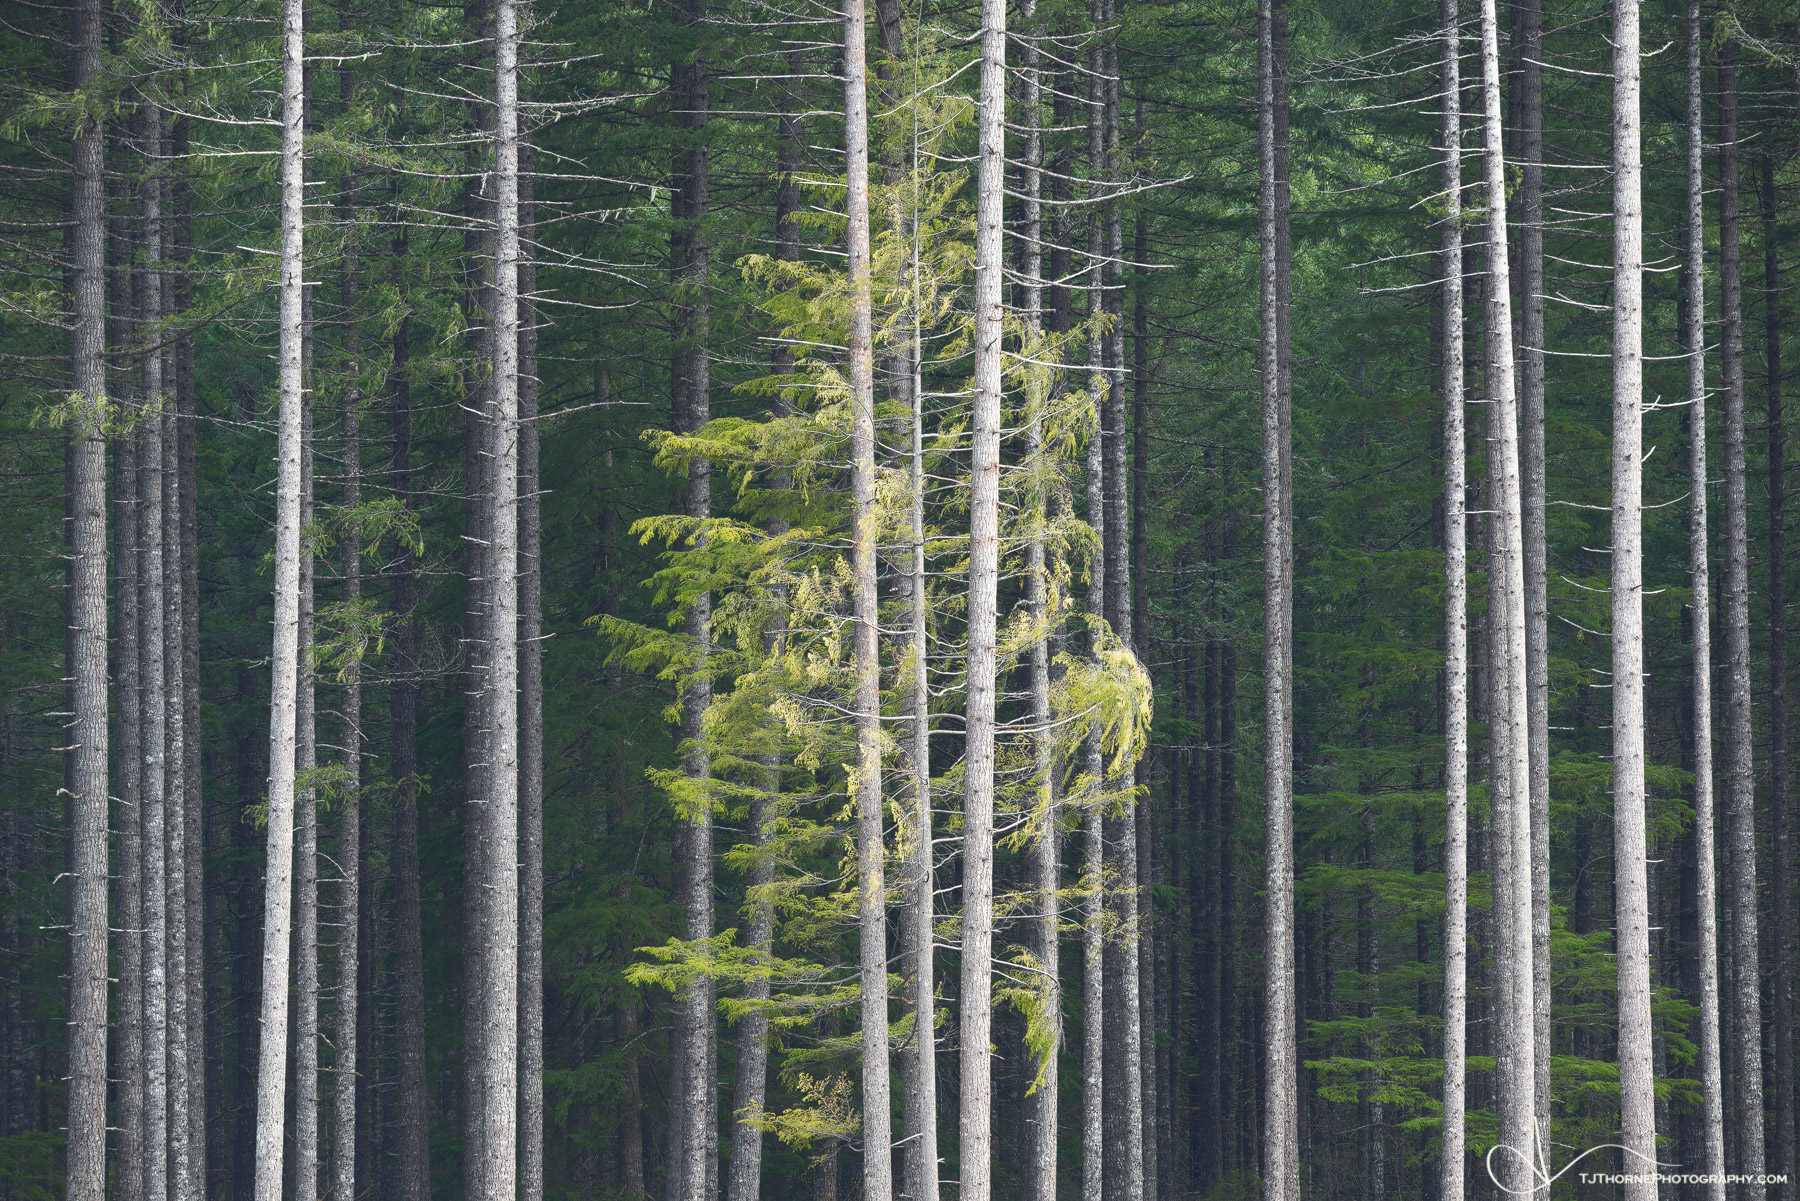 Tree symmetry on the forest edge in Gifford Pinchot National Forest, Washington.